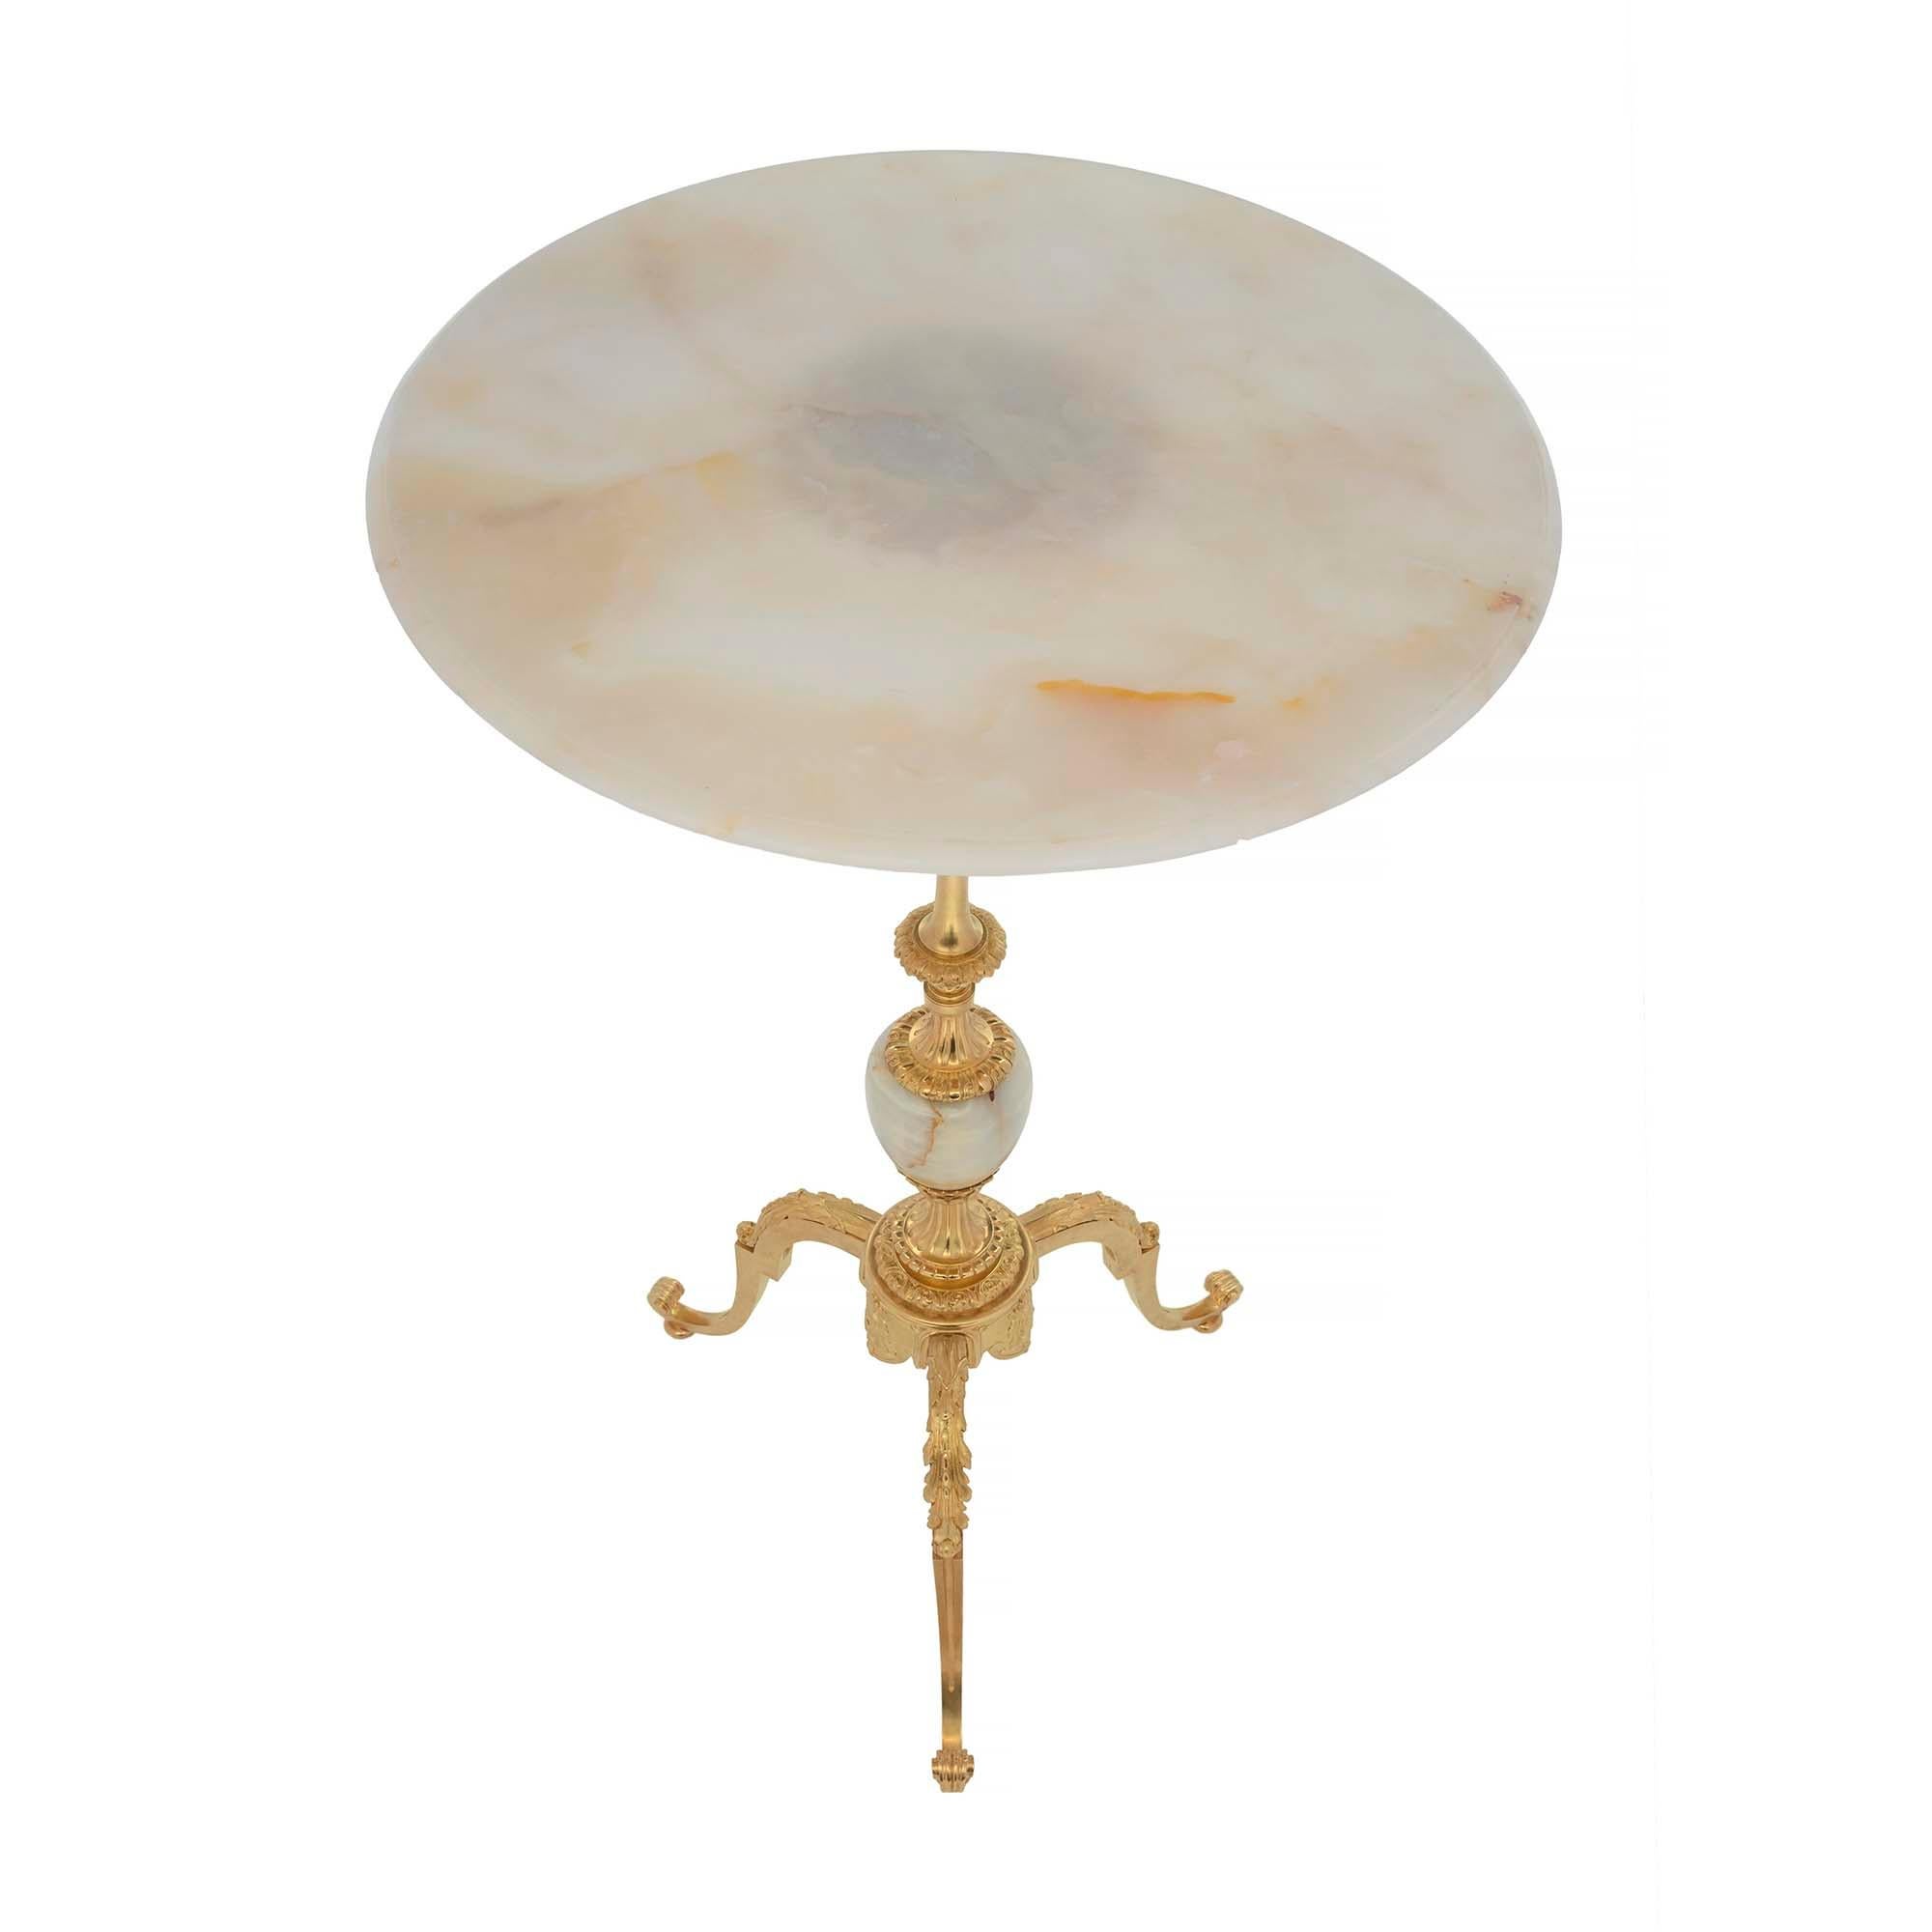 French 19th Century Louis XVI St. Napoleon III Period Onyx and Ormolu Side Table In Good Condition For Sale In West Palm Beach, FL